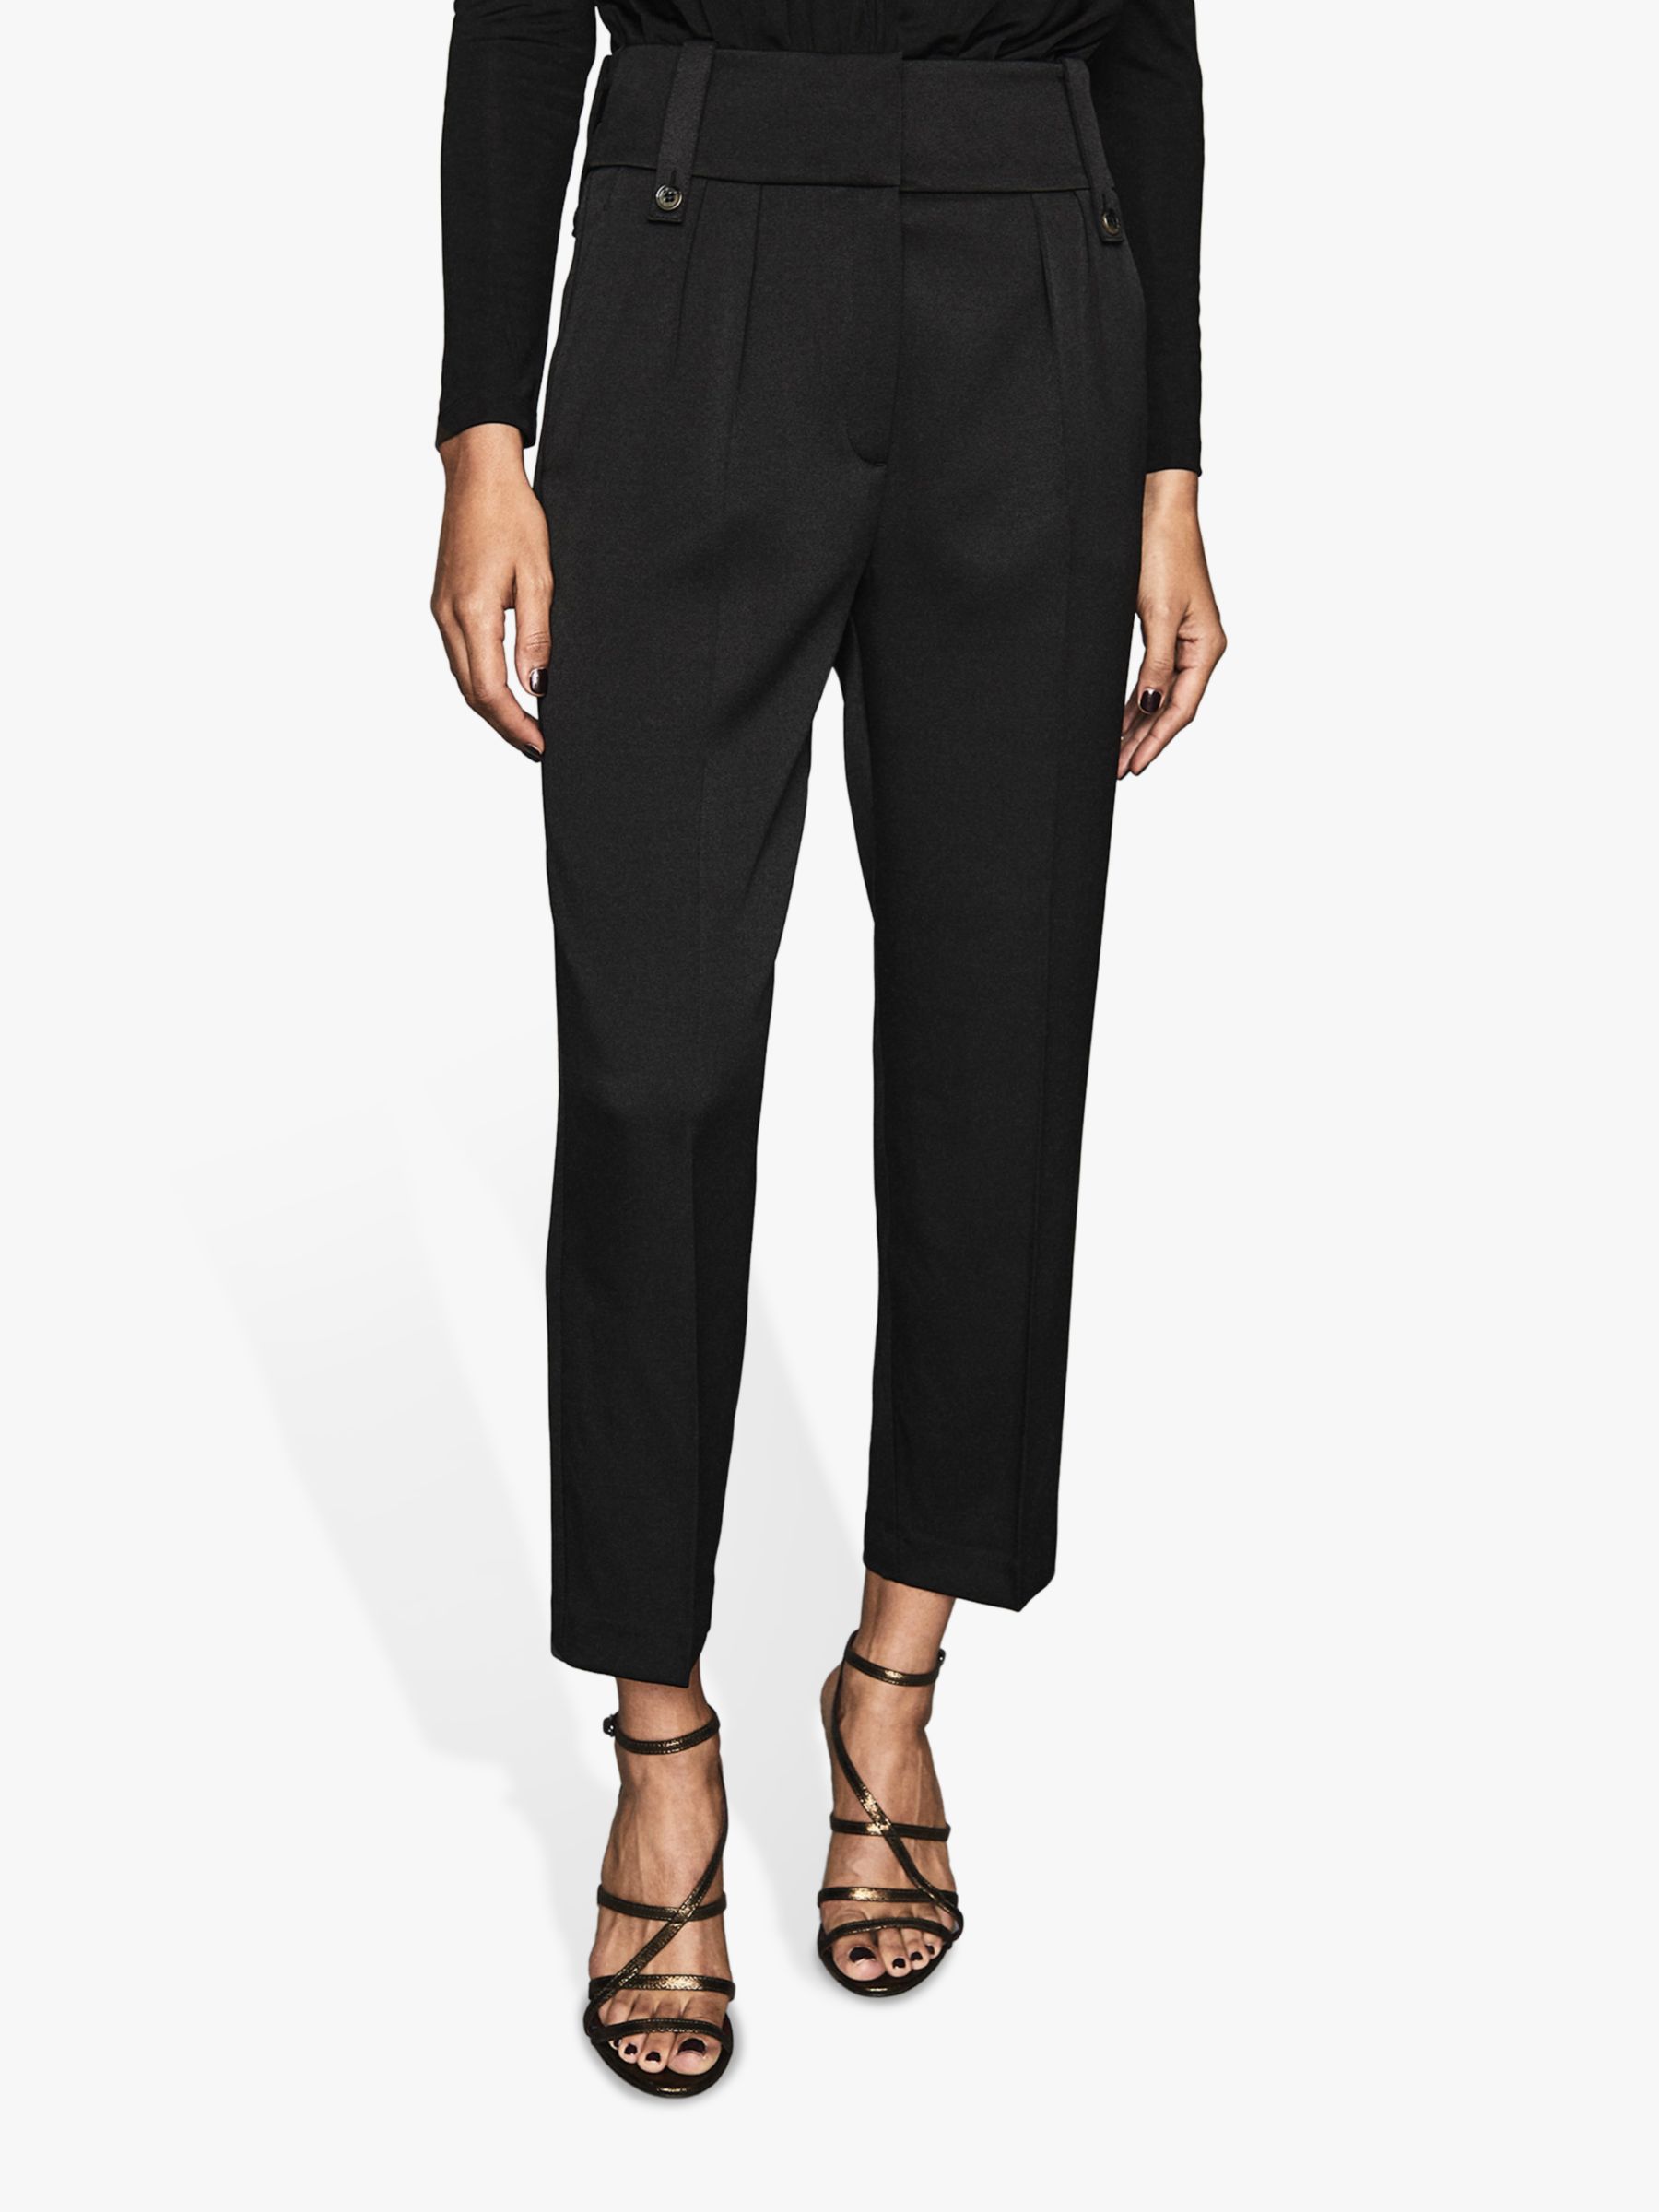 Reiss Lennox Wide Band Tapered Trousers, Black